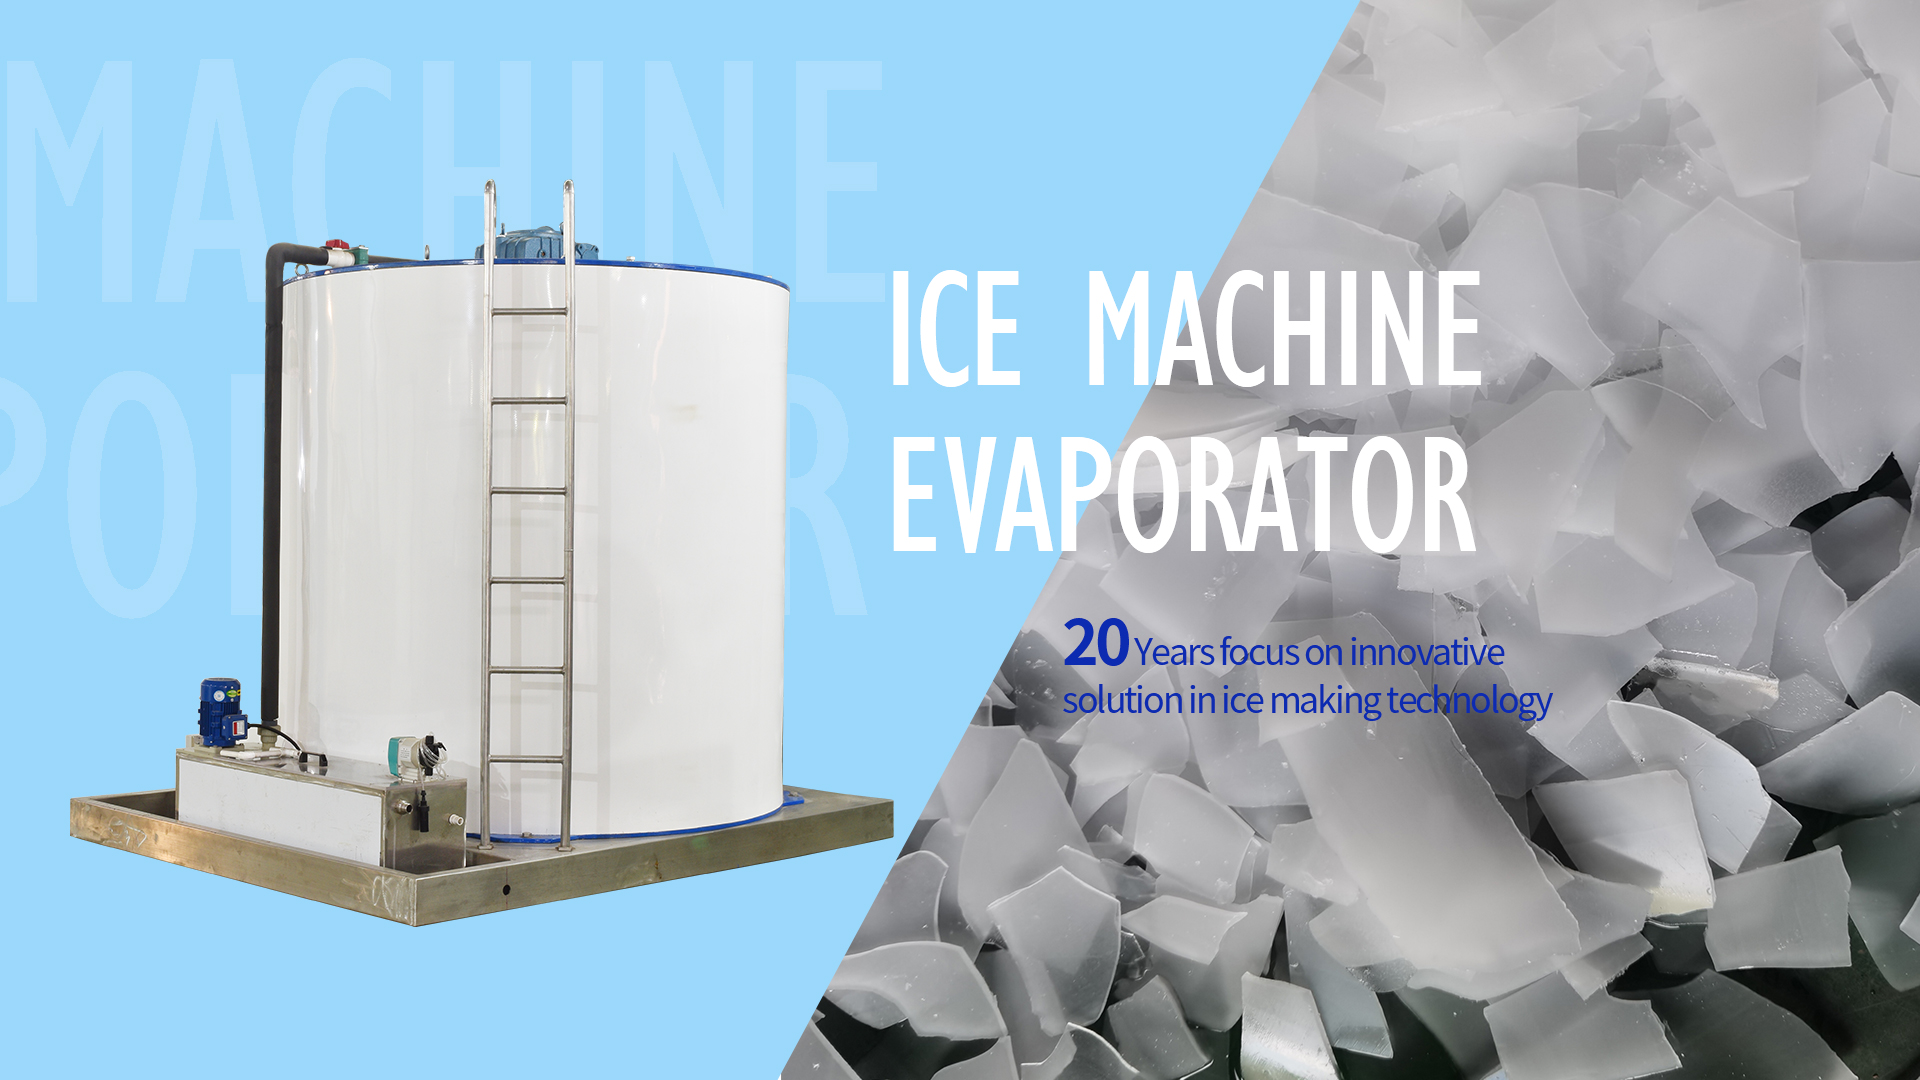 Icesta Ice Flake Maker Drum 10tons Industrial Flake Ice Evaporator of Factory Price $10000 - $20000